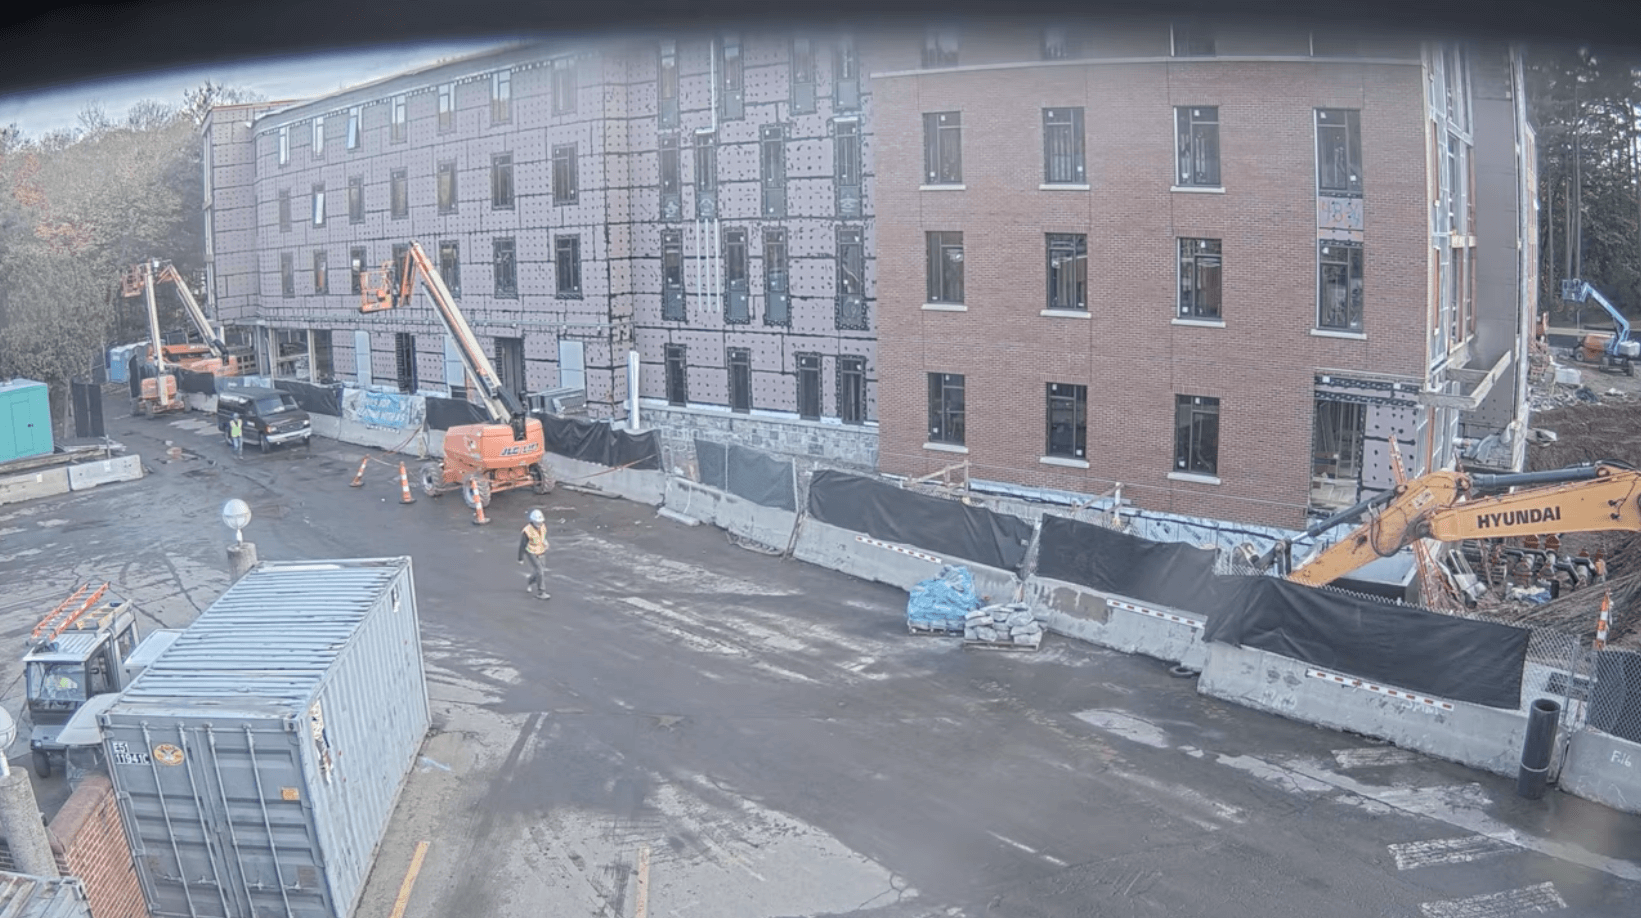 Live view video of construction of South Quad video